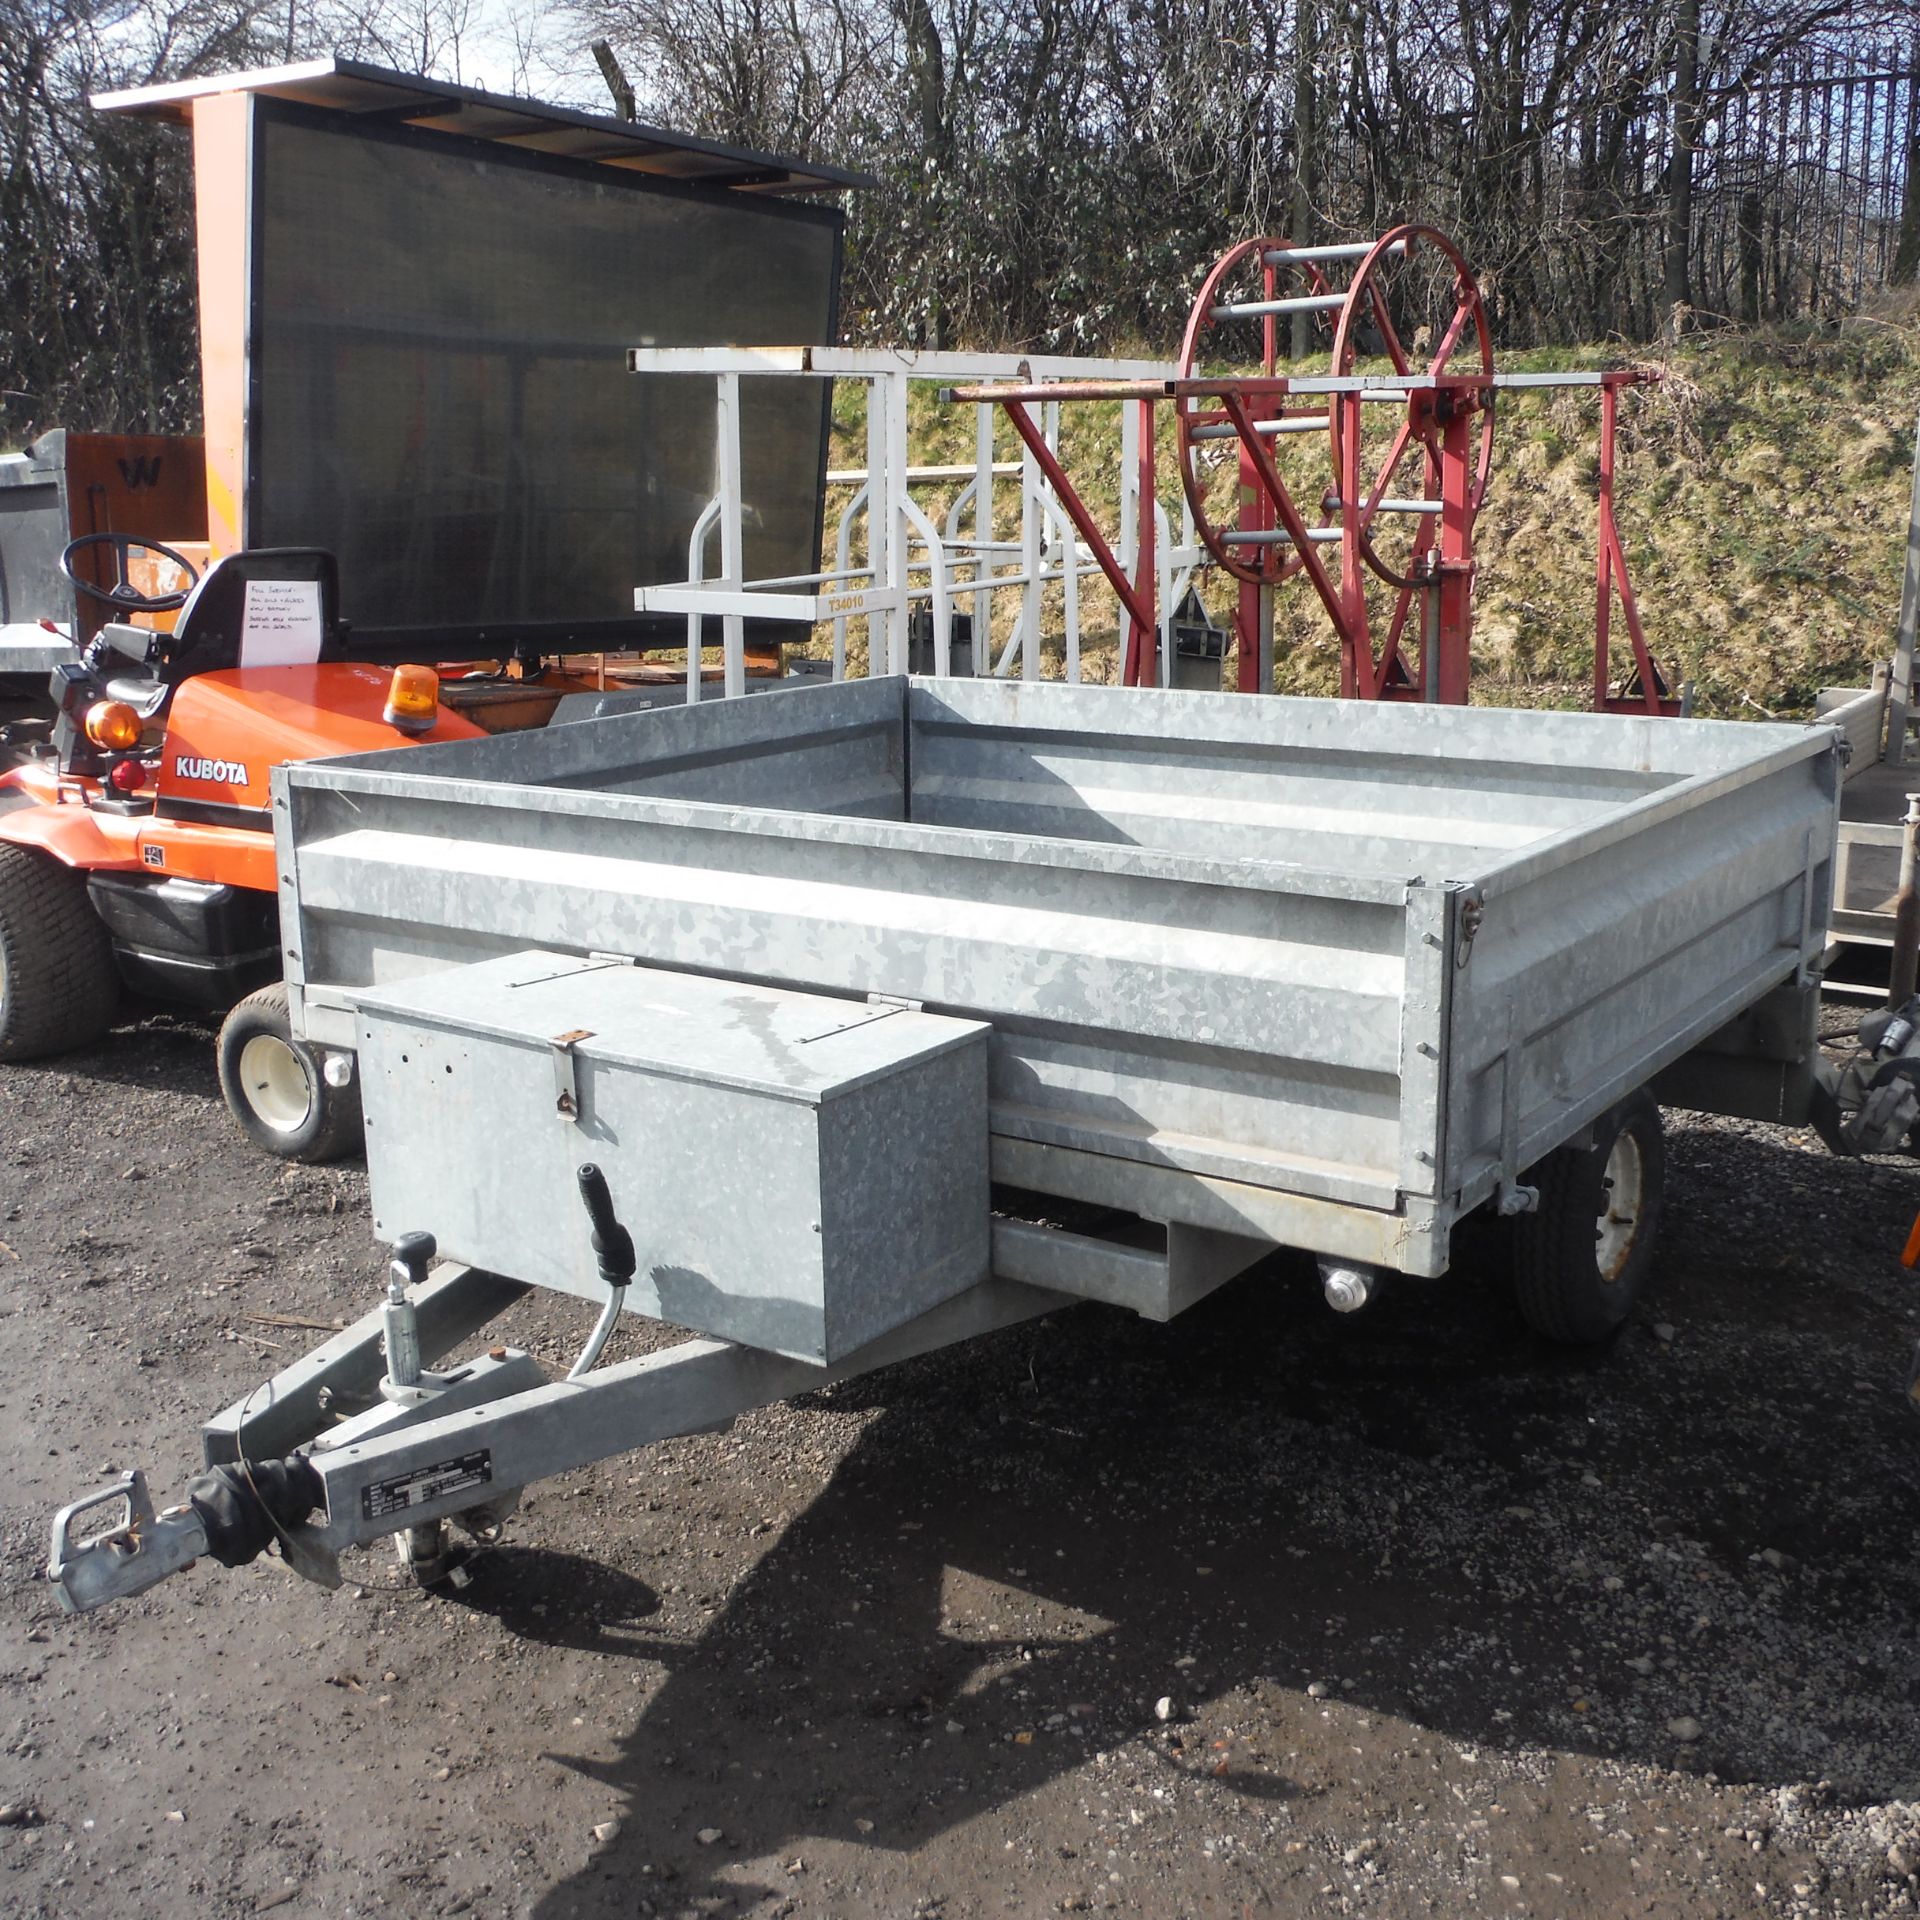 INDESPENSION CHALLENGER single axle braked utility trailer fully galvanised drop side, new non